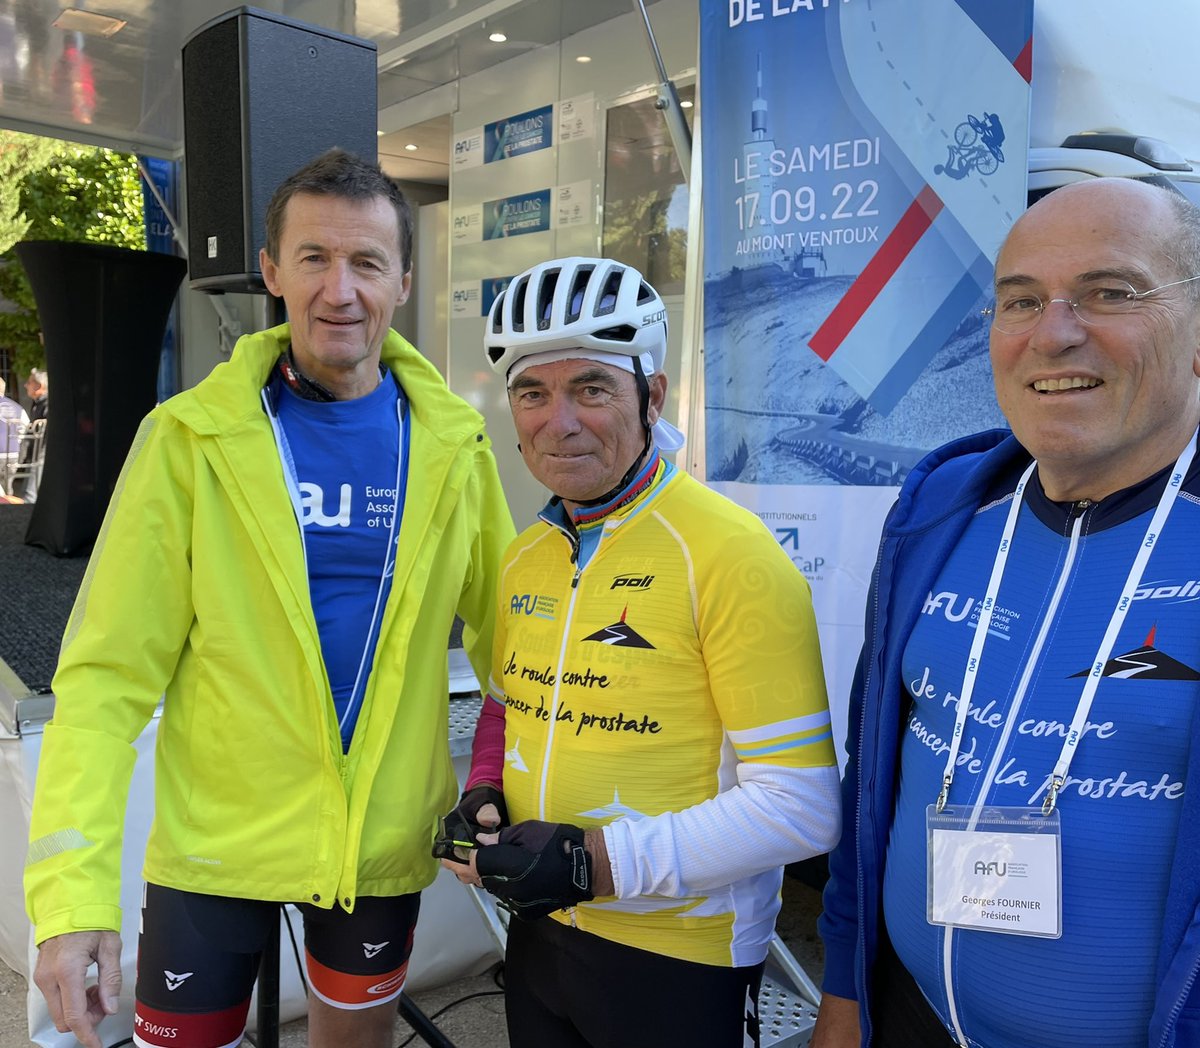 Climbing Mont Ventoux was a resounding success in bringing awareness to the fight against #prostatecancer! Bernard Hinault made the climb to the peak with us in high spirits @pr_gfournier @AFUrologie @Uroweb